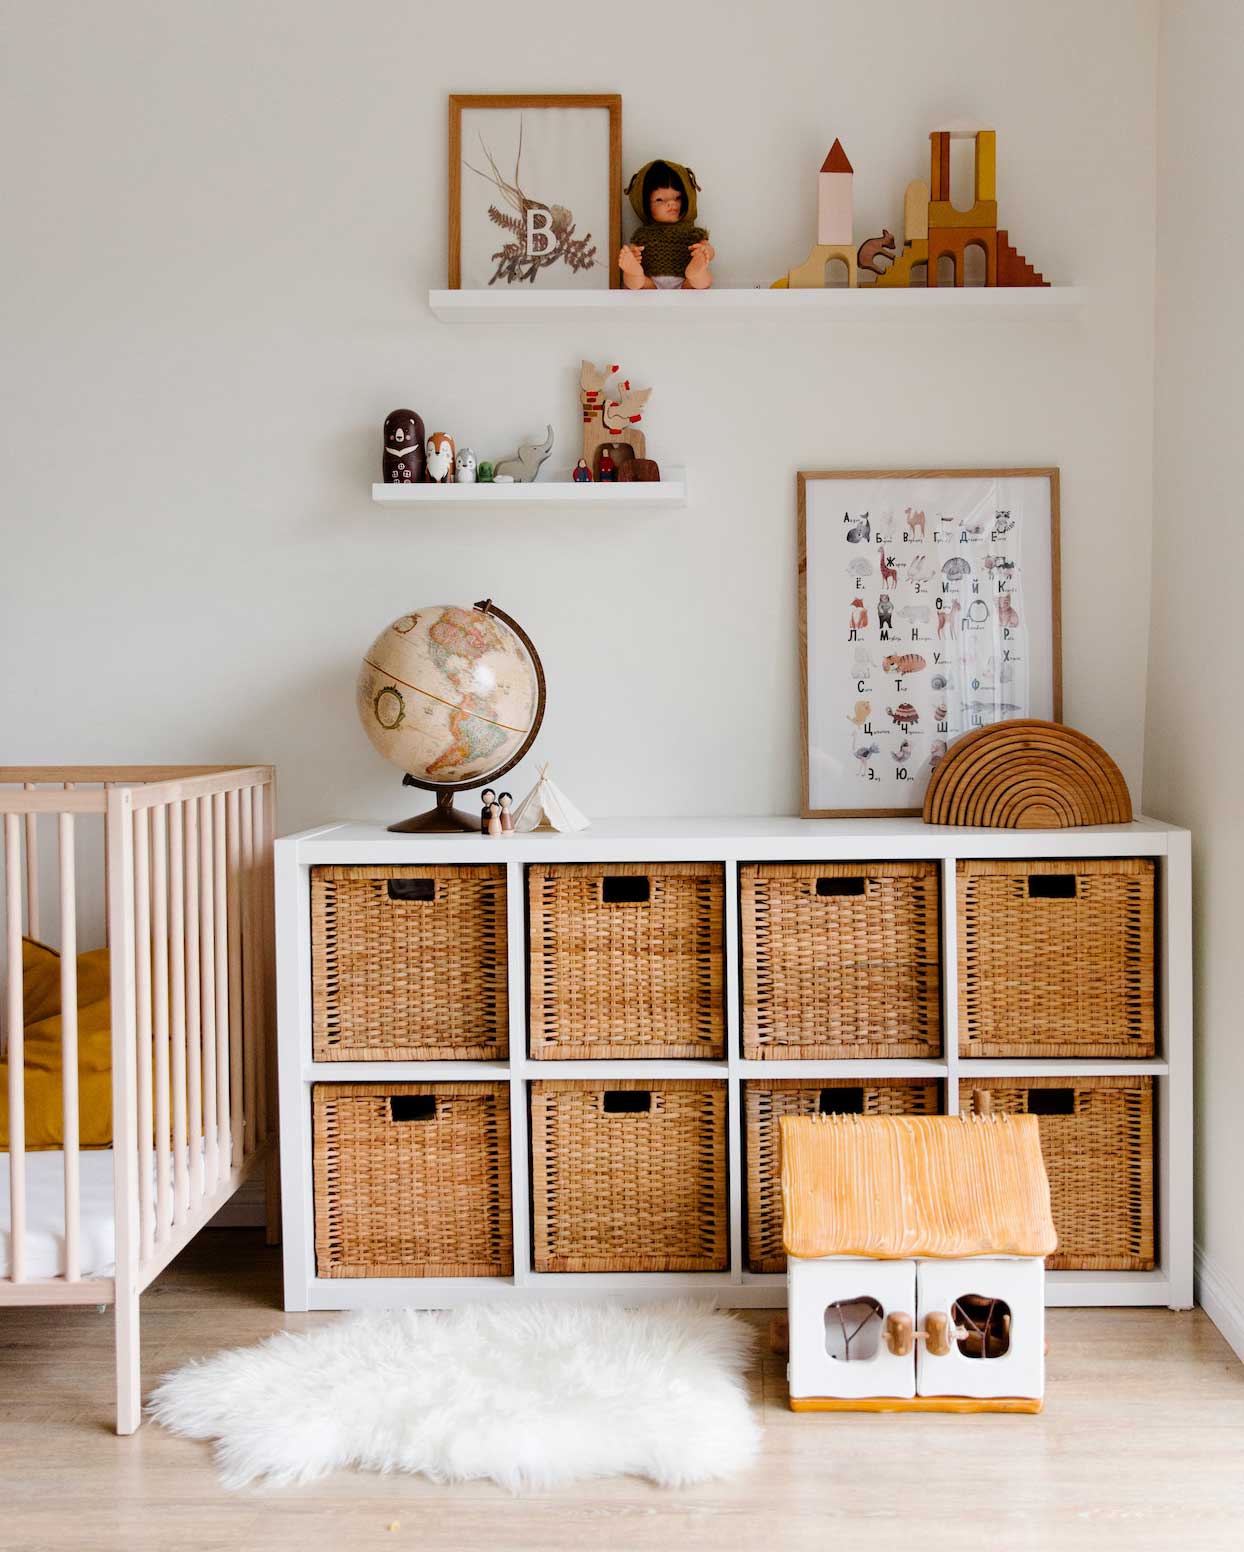 Children's bedroom with wooden furniture, toys, and a globe placed on shelves in the room